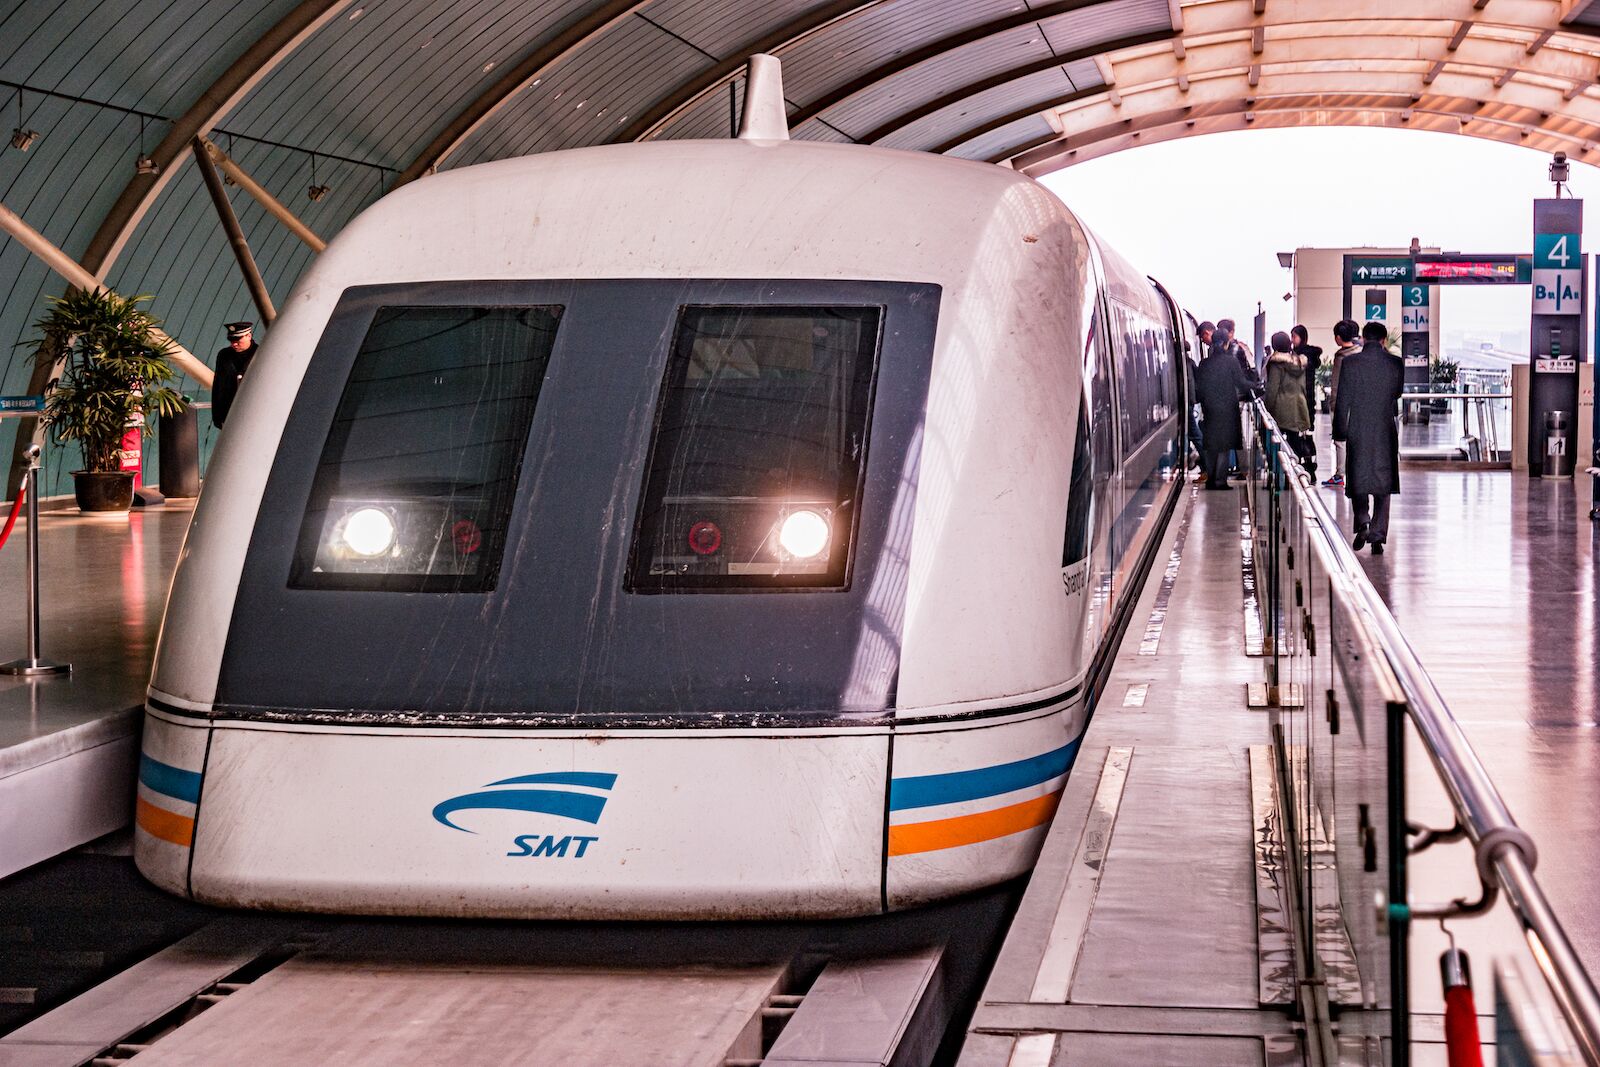 The Shanghai Transrapid Maglev Train is the fastest train in the world